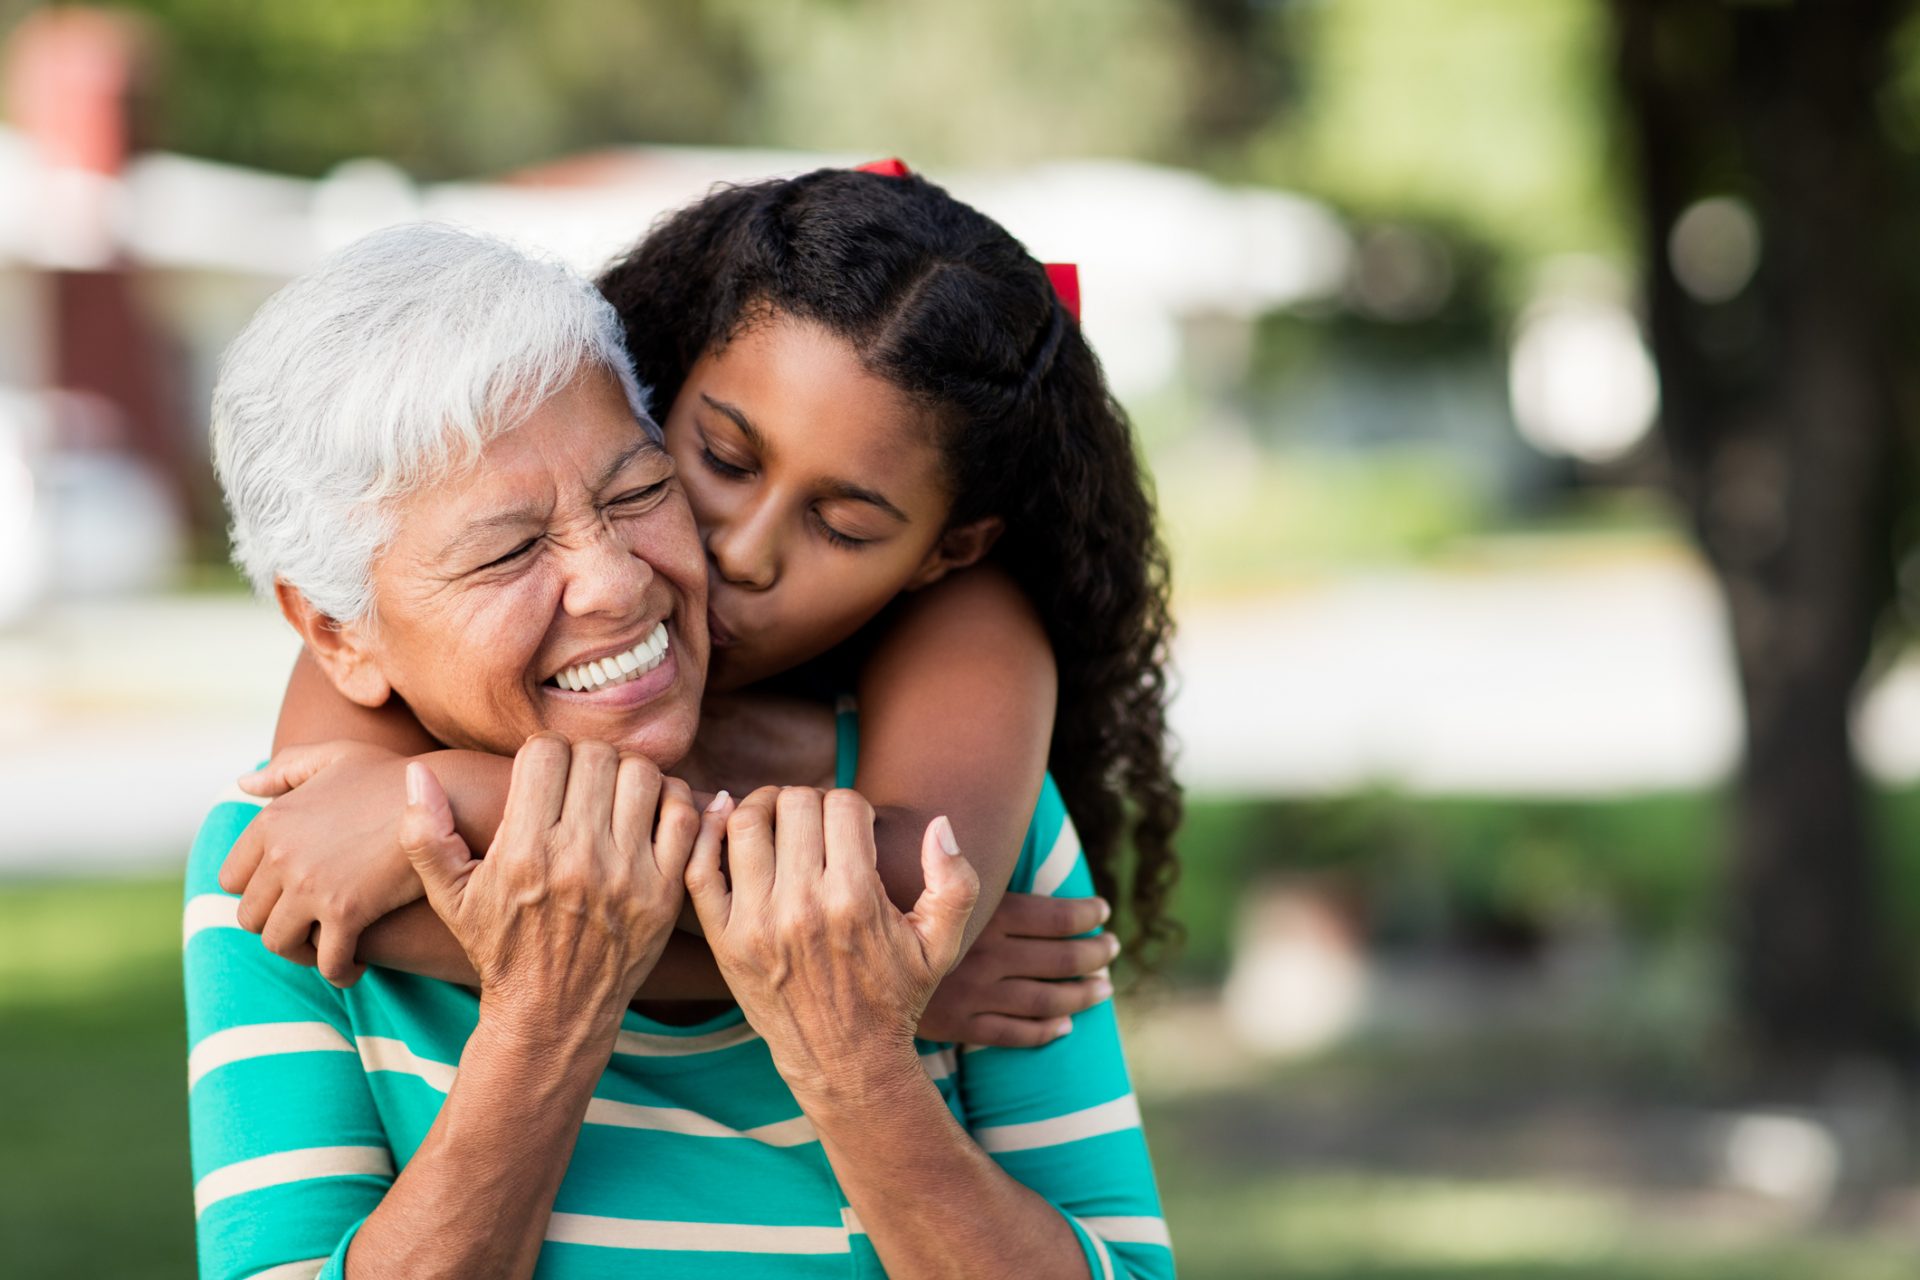 Smiling senior woman embraced from behind by young girl outdoors in a sunny community area.